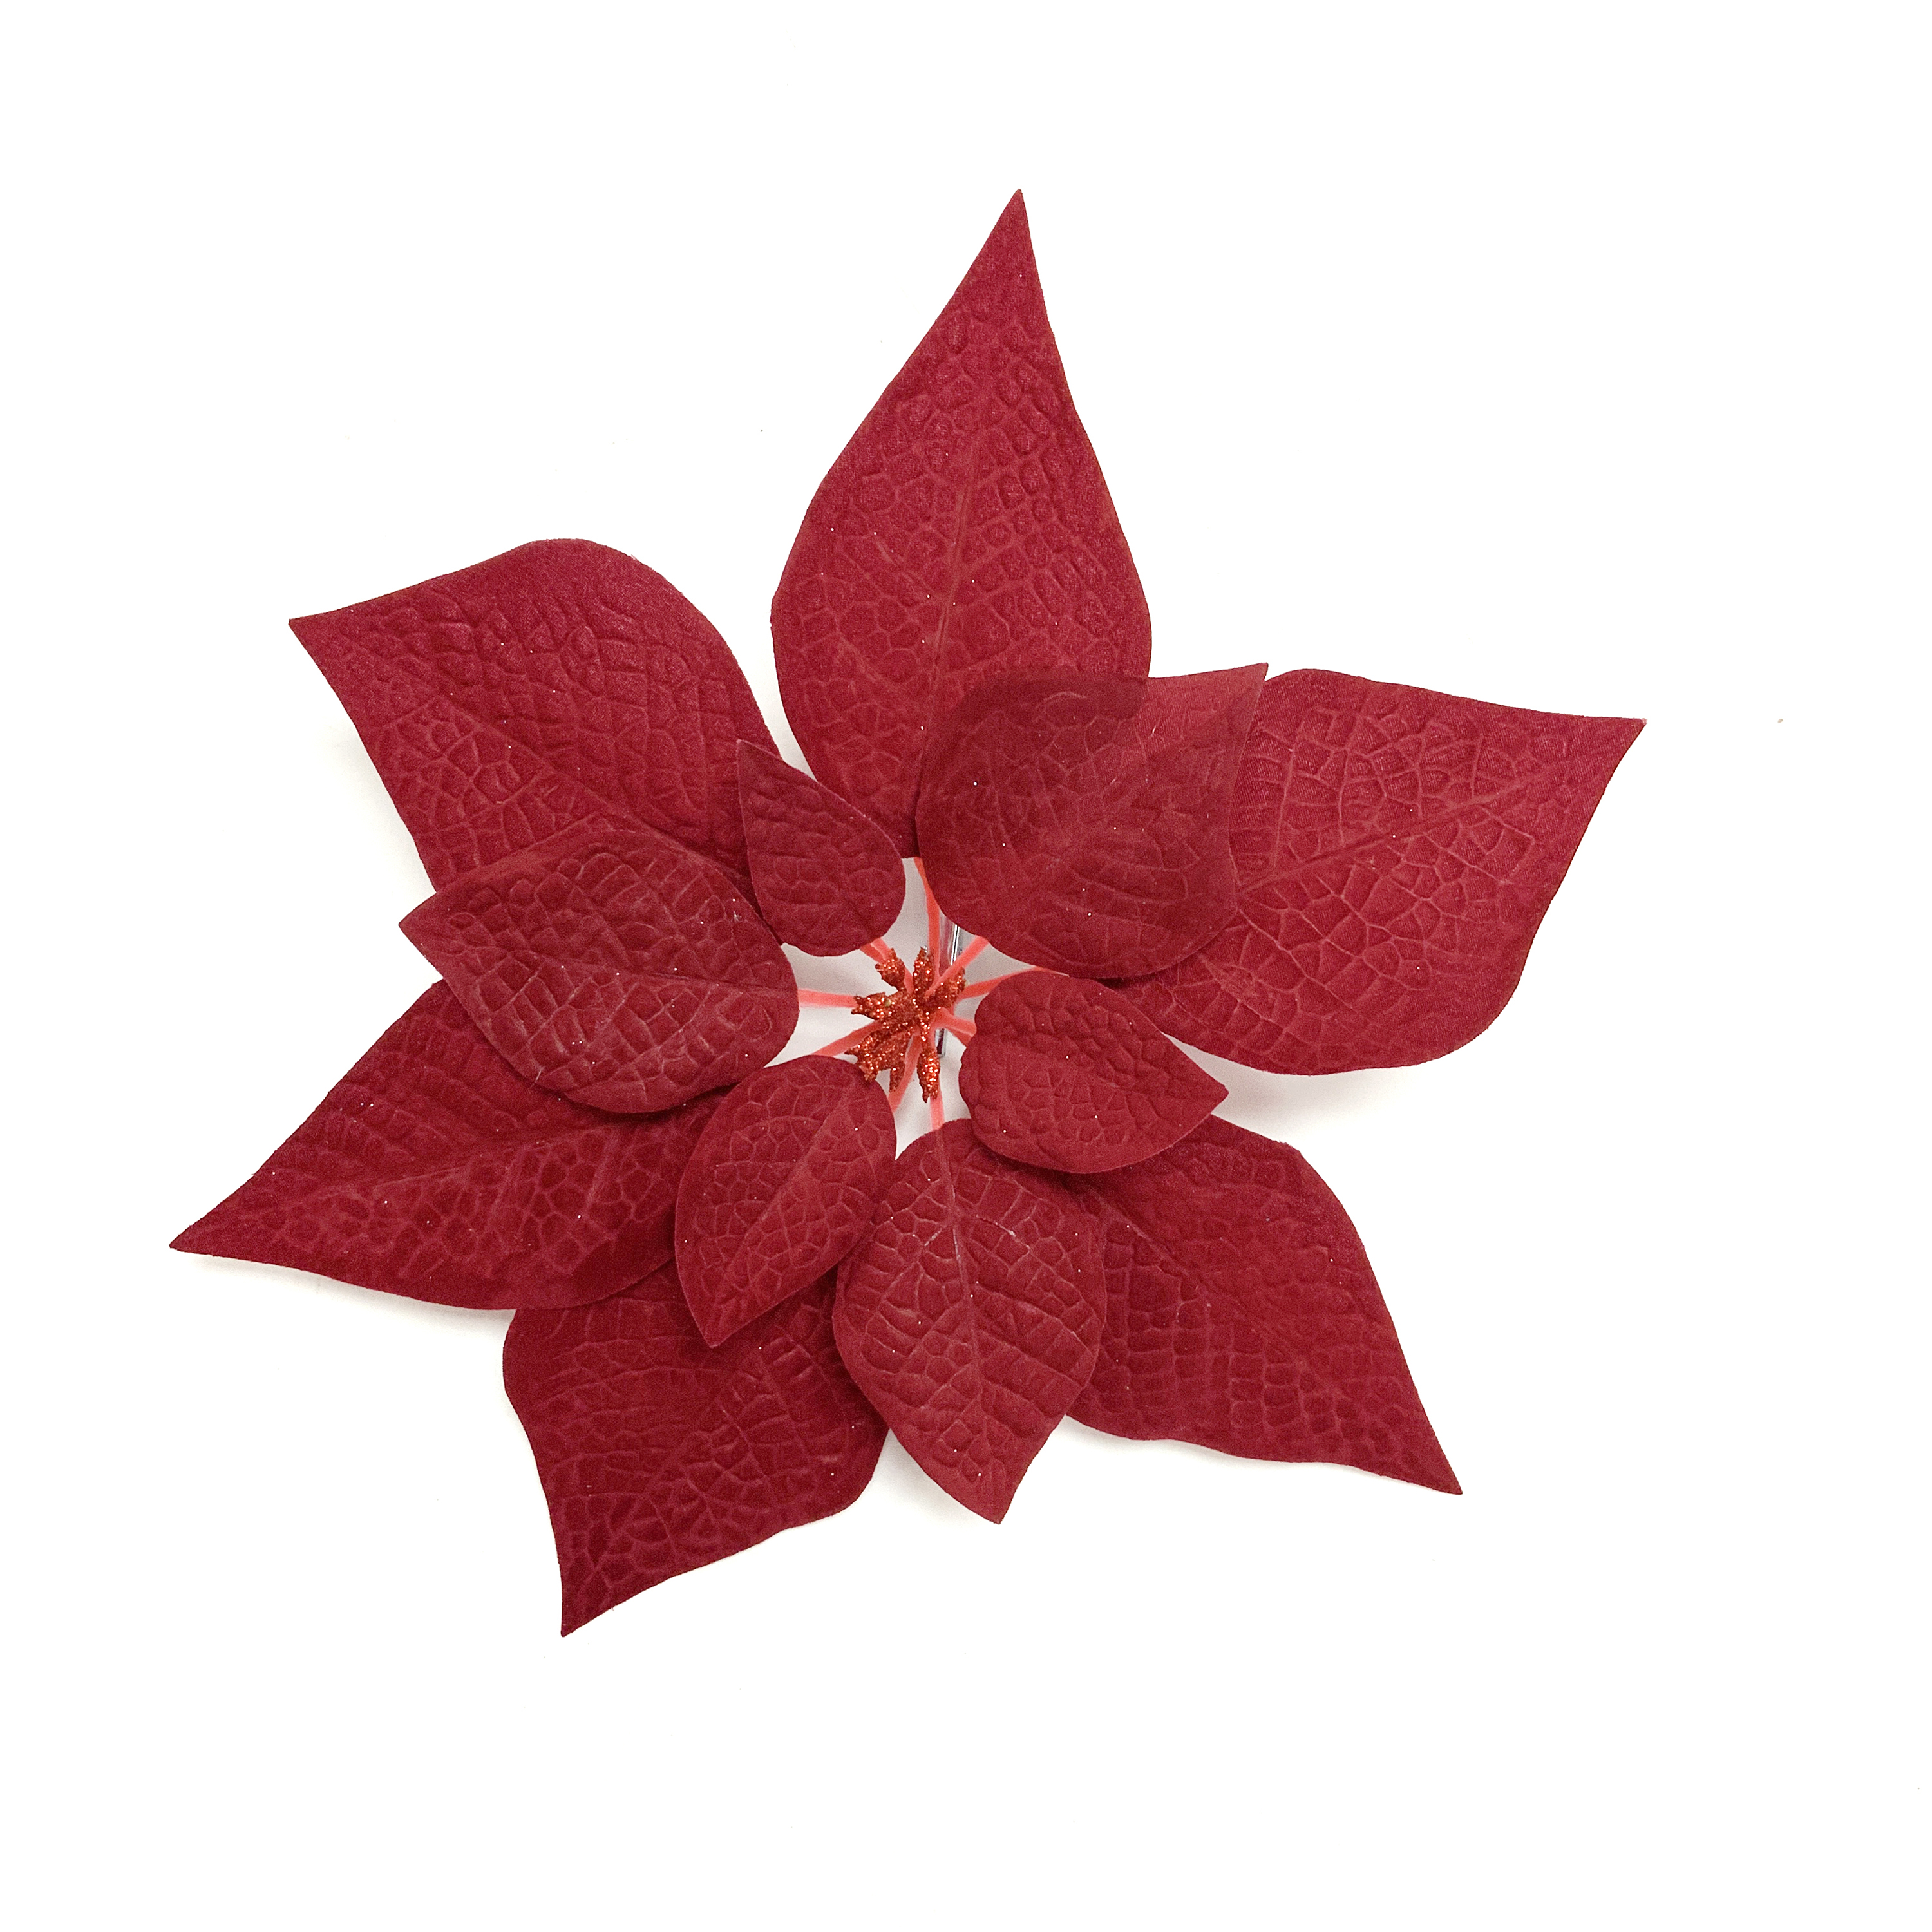 Holiday Time 11" Burgundy Red Velvet Poinsettia Clip Christmas Ornaments, 12 Count - image 2 of 5